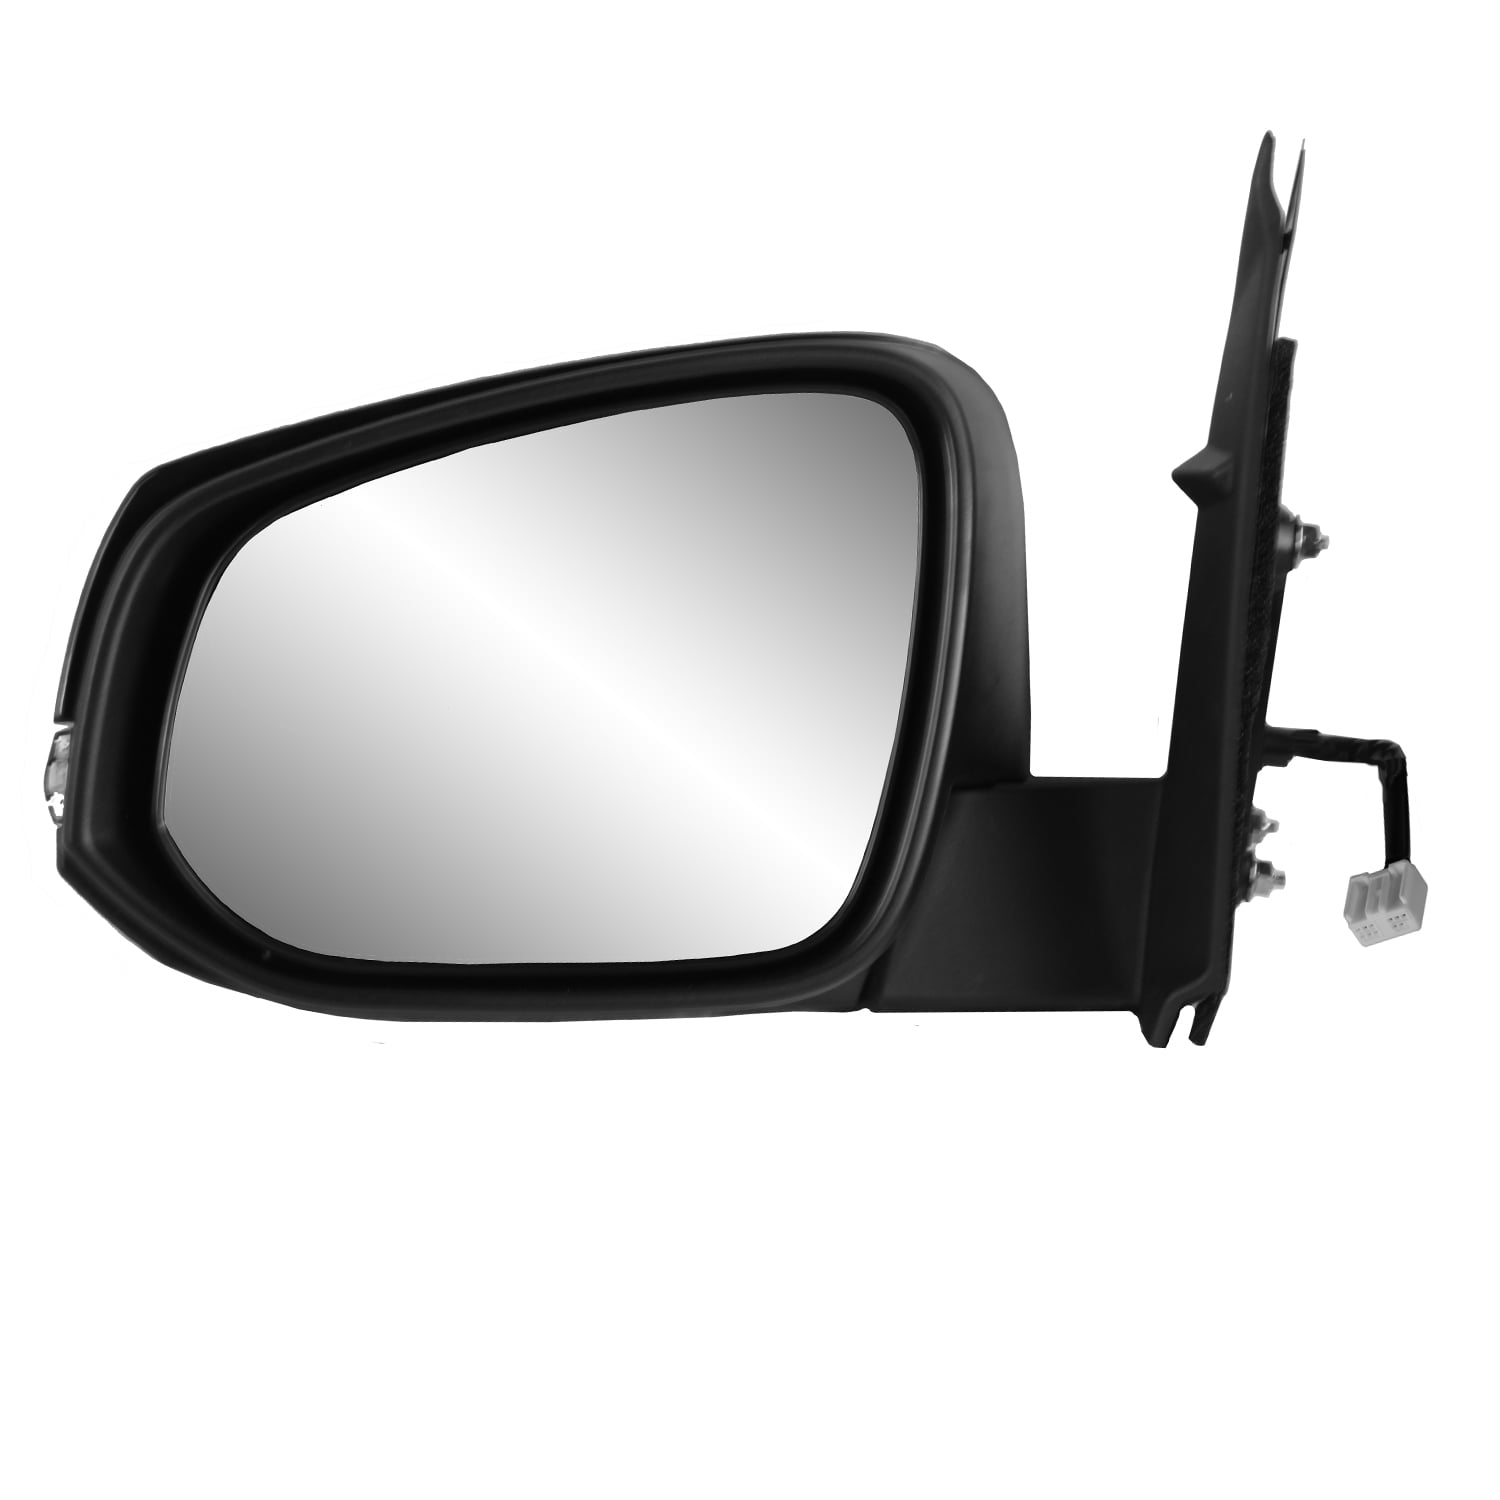 w/o spot Mirror Foldaway Textured Black Heated Power Driver Side Mirror for Toyota Tacoma w/o Puddle lamp w/o Blind spot Detection System 